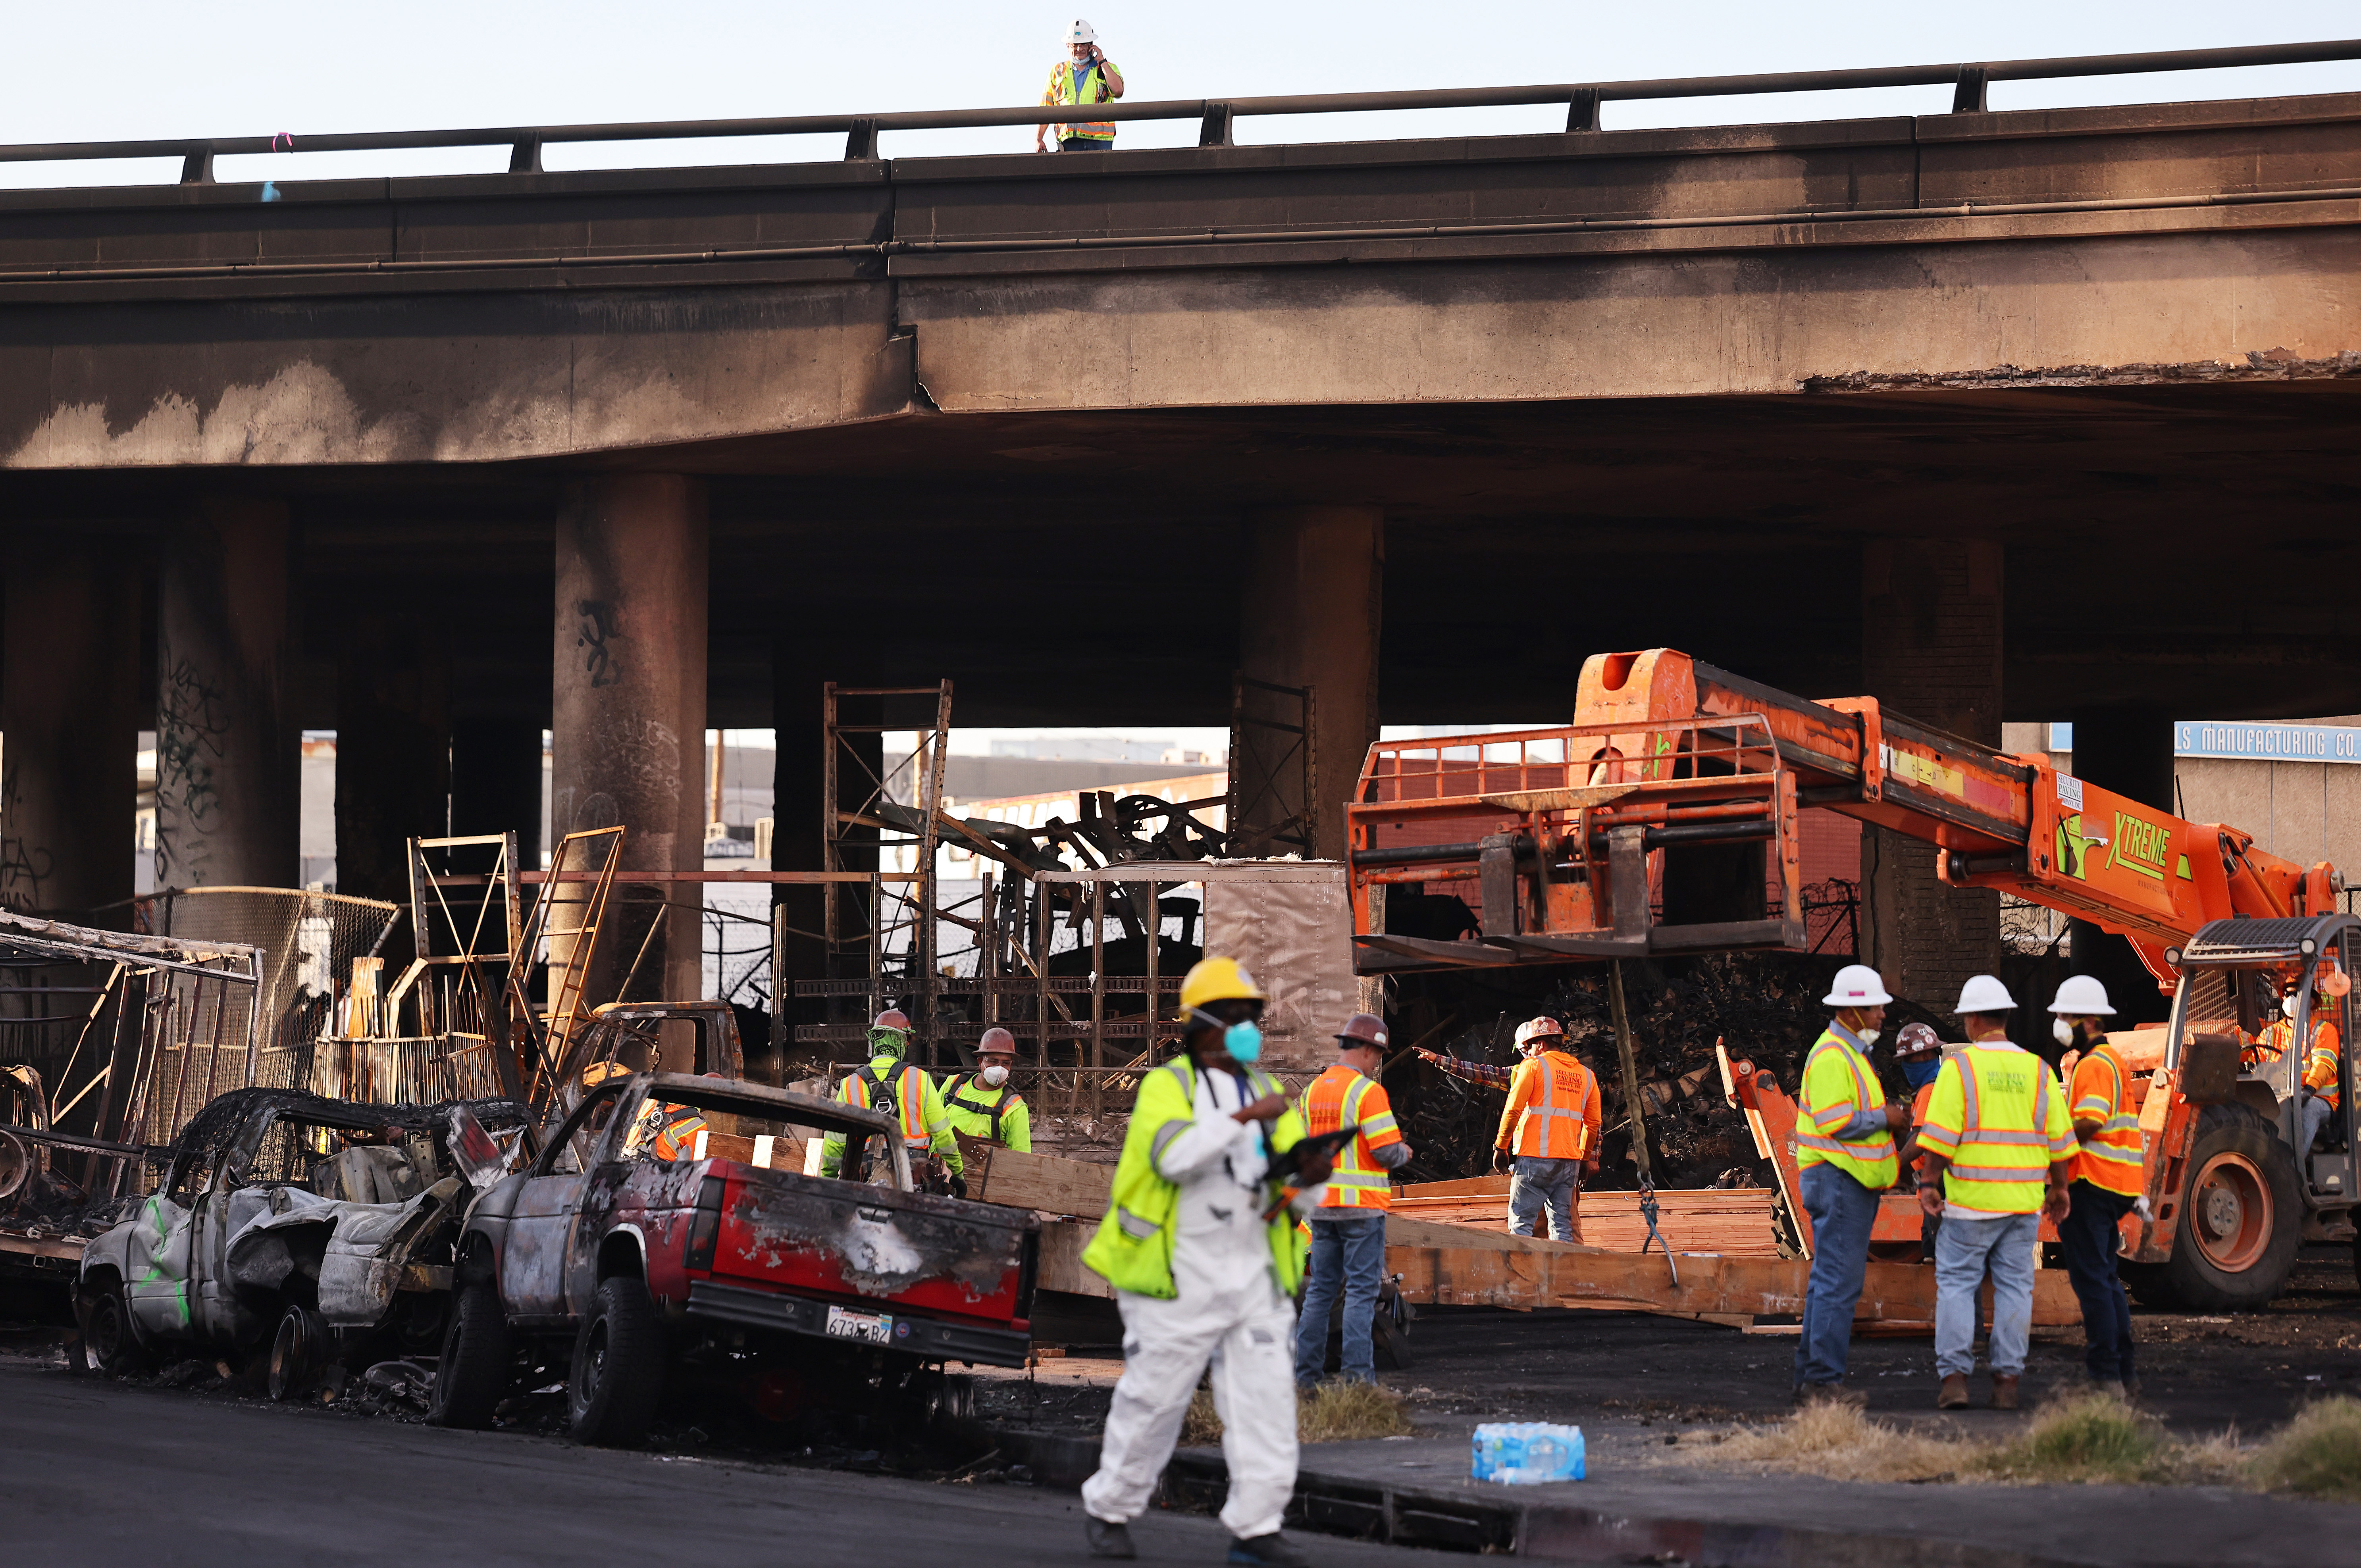 LOS ANGELES, CALIFORNIA - NOVEMBER 13: Crews work beneath the closed I-10 elevated freeway following a large pallet fire, which occurred Saturday at a storage yard beneath the freeway, on November 13, 2023 in Los Angeles, California. Engineers have been assessing the extent of the damage and it remains unknown how long the freeway, which is a major commuter artery through the downtown area, will remain closed and complicate traffic for the city. California Governor Gavin Newsom said the fire was caused by arson and that over 300,000 vehicles drive through the freeway corridor each day with drivers being urged to use public transit. (Photo by Mario Tama/Getty Images)